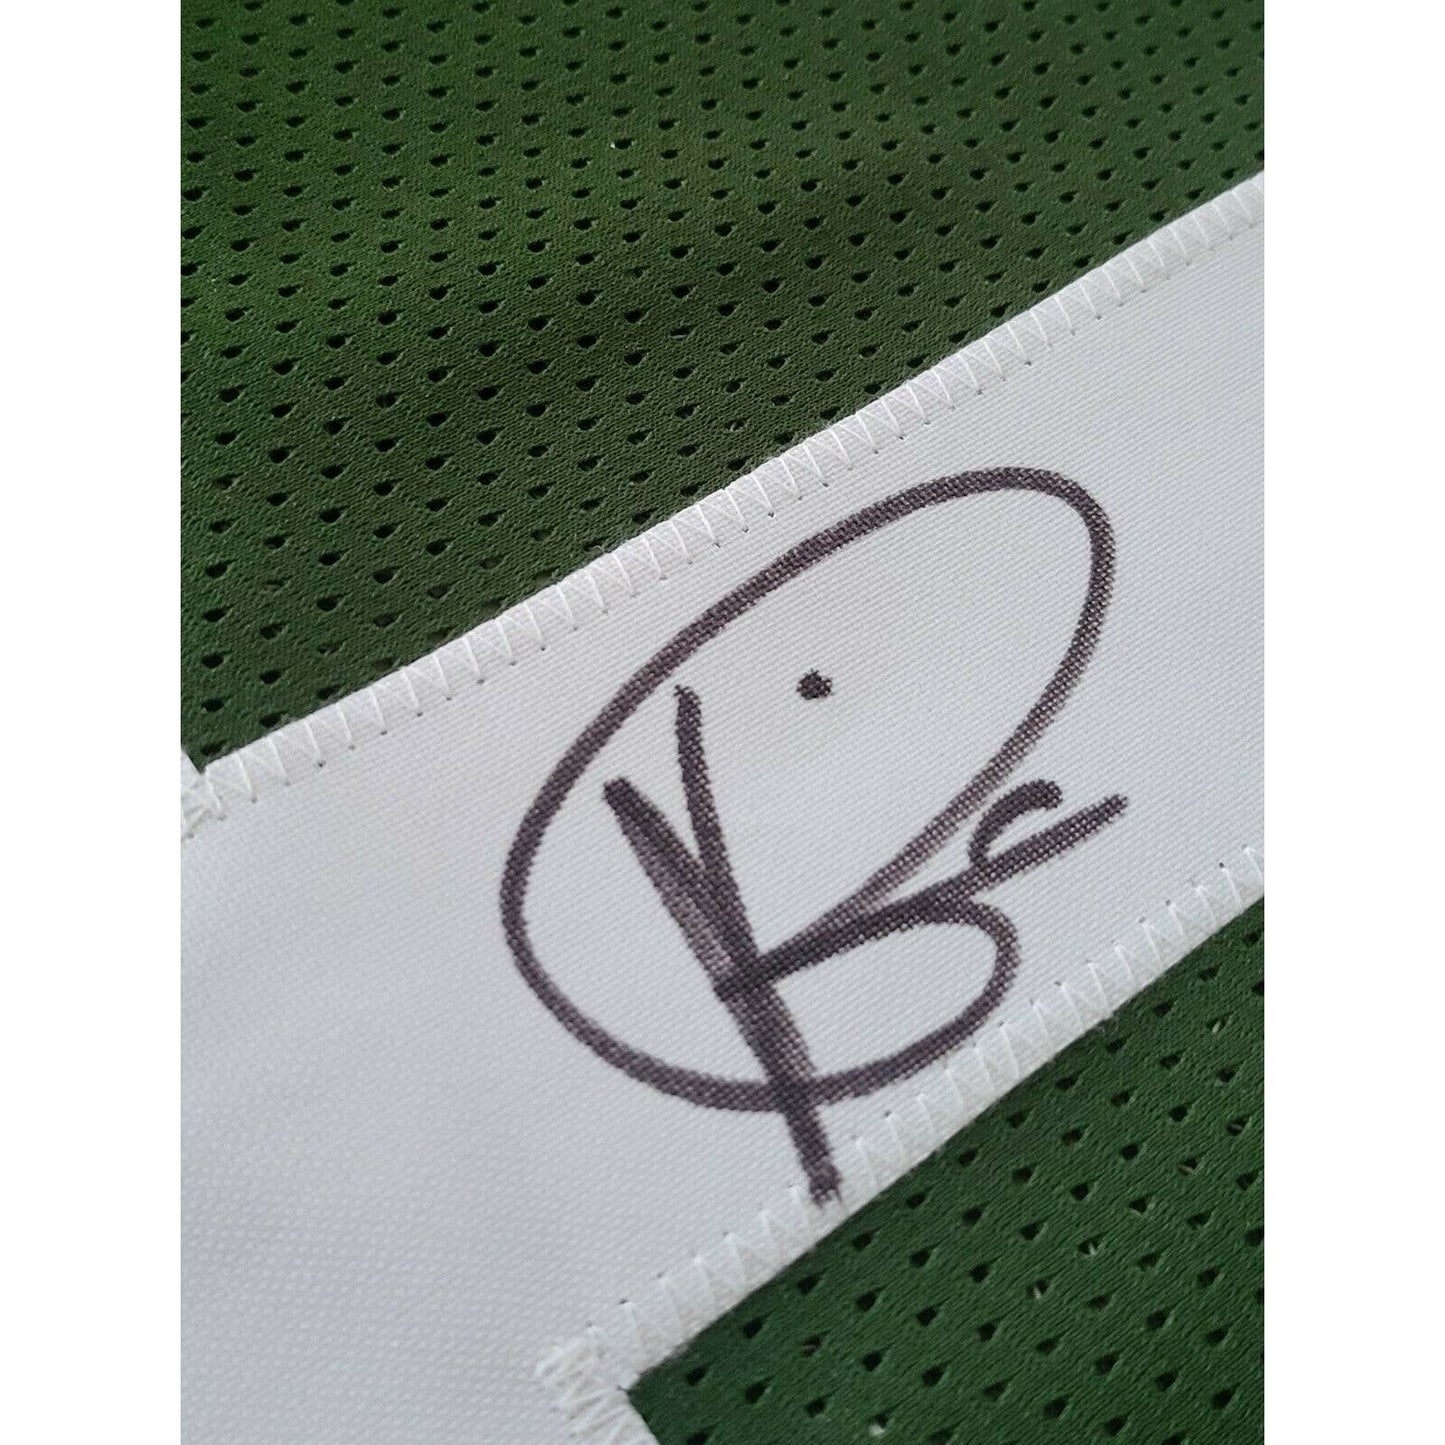 Andre Rison Autographed/Signed Jersey JSA Sticker Michigan State Spartans St - TreasuresEvolved